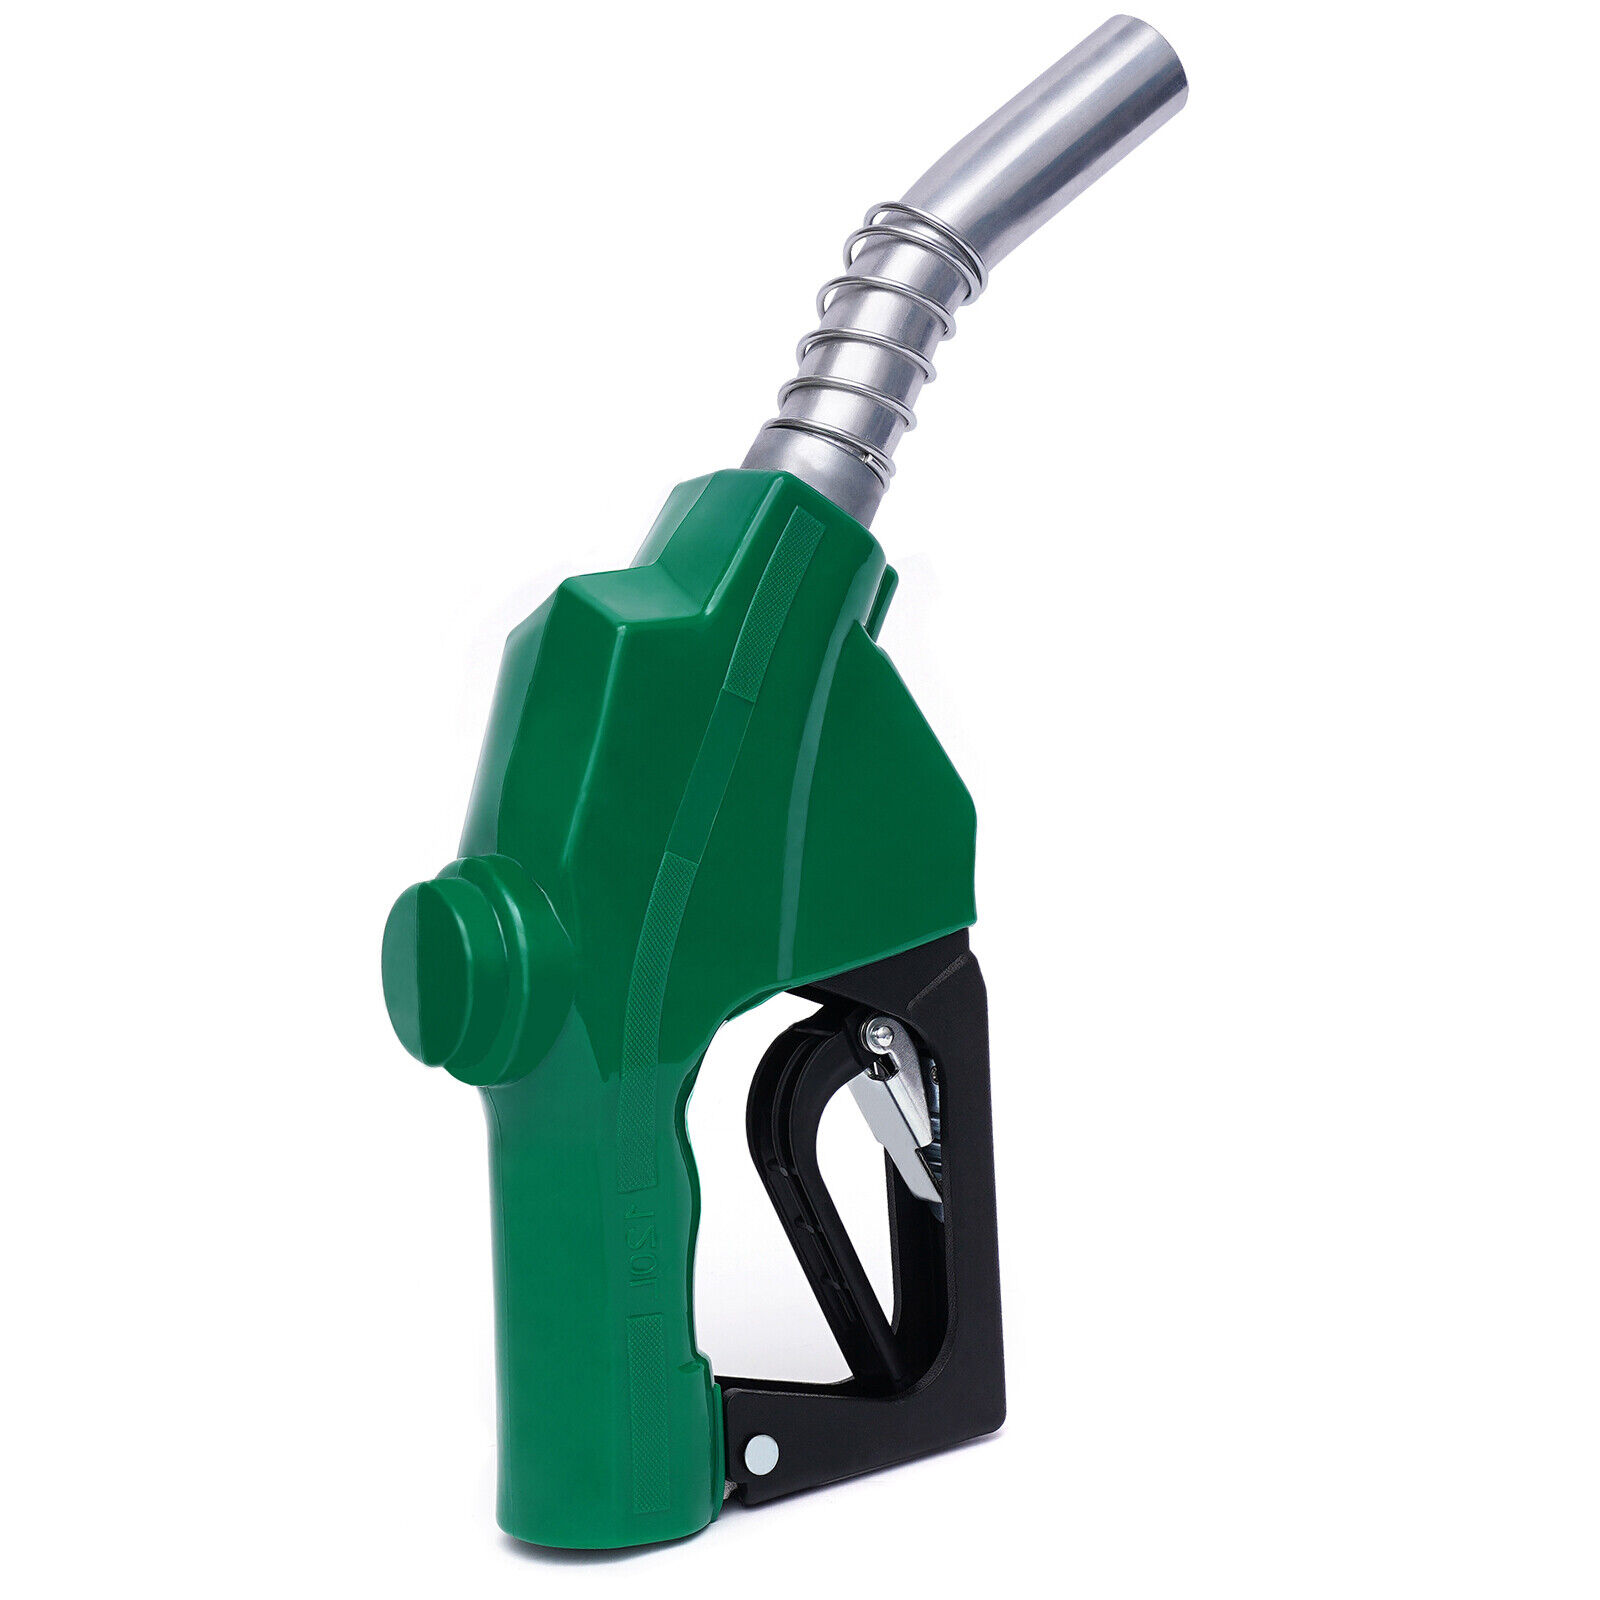 YIYIBYUS Auto Shut-Off Fuel Nozzle Gas Pump Fuel Gun for Gas Stations Fuel Refilling, Max Flow Rate 31.7GAL/Min - image 4 of 12